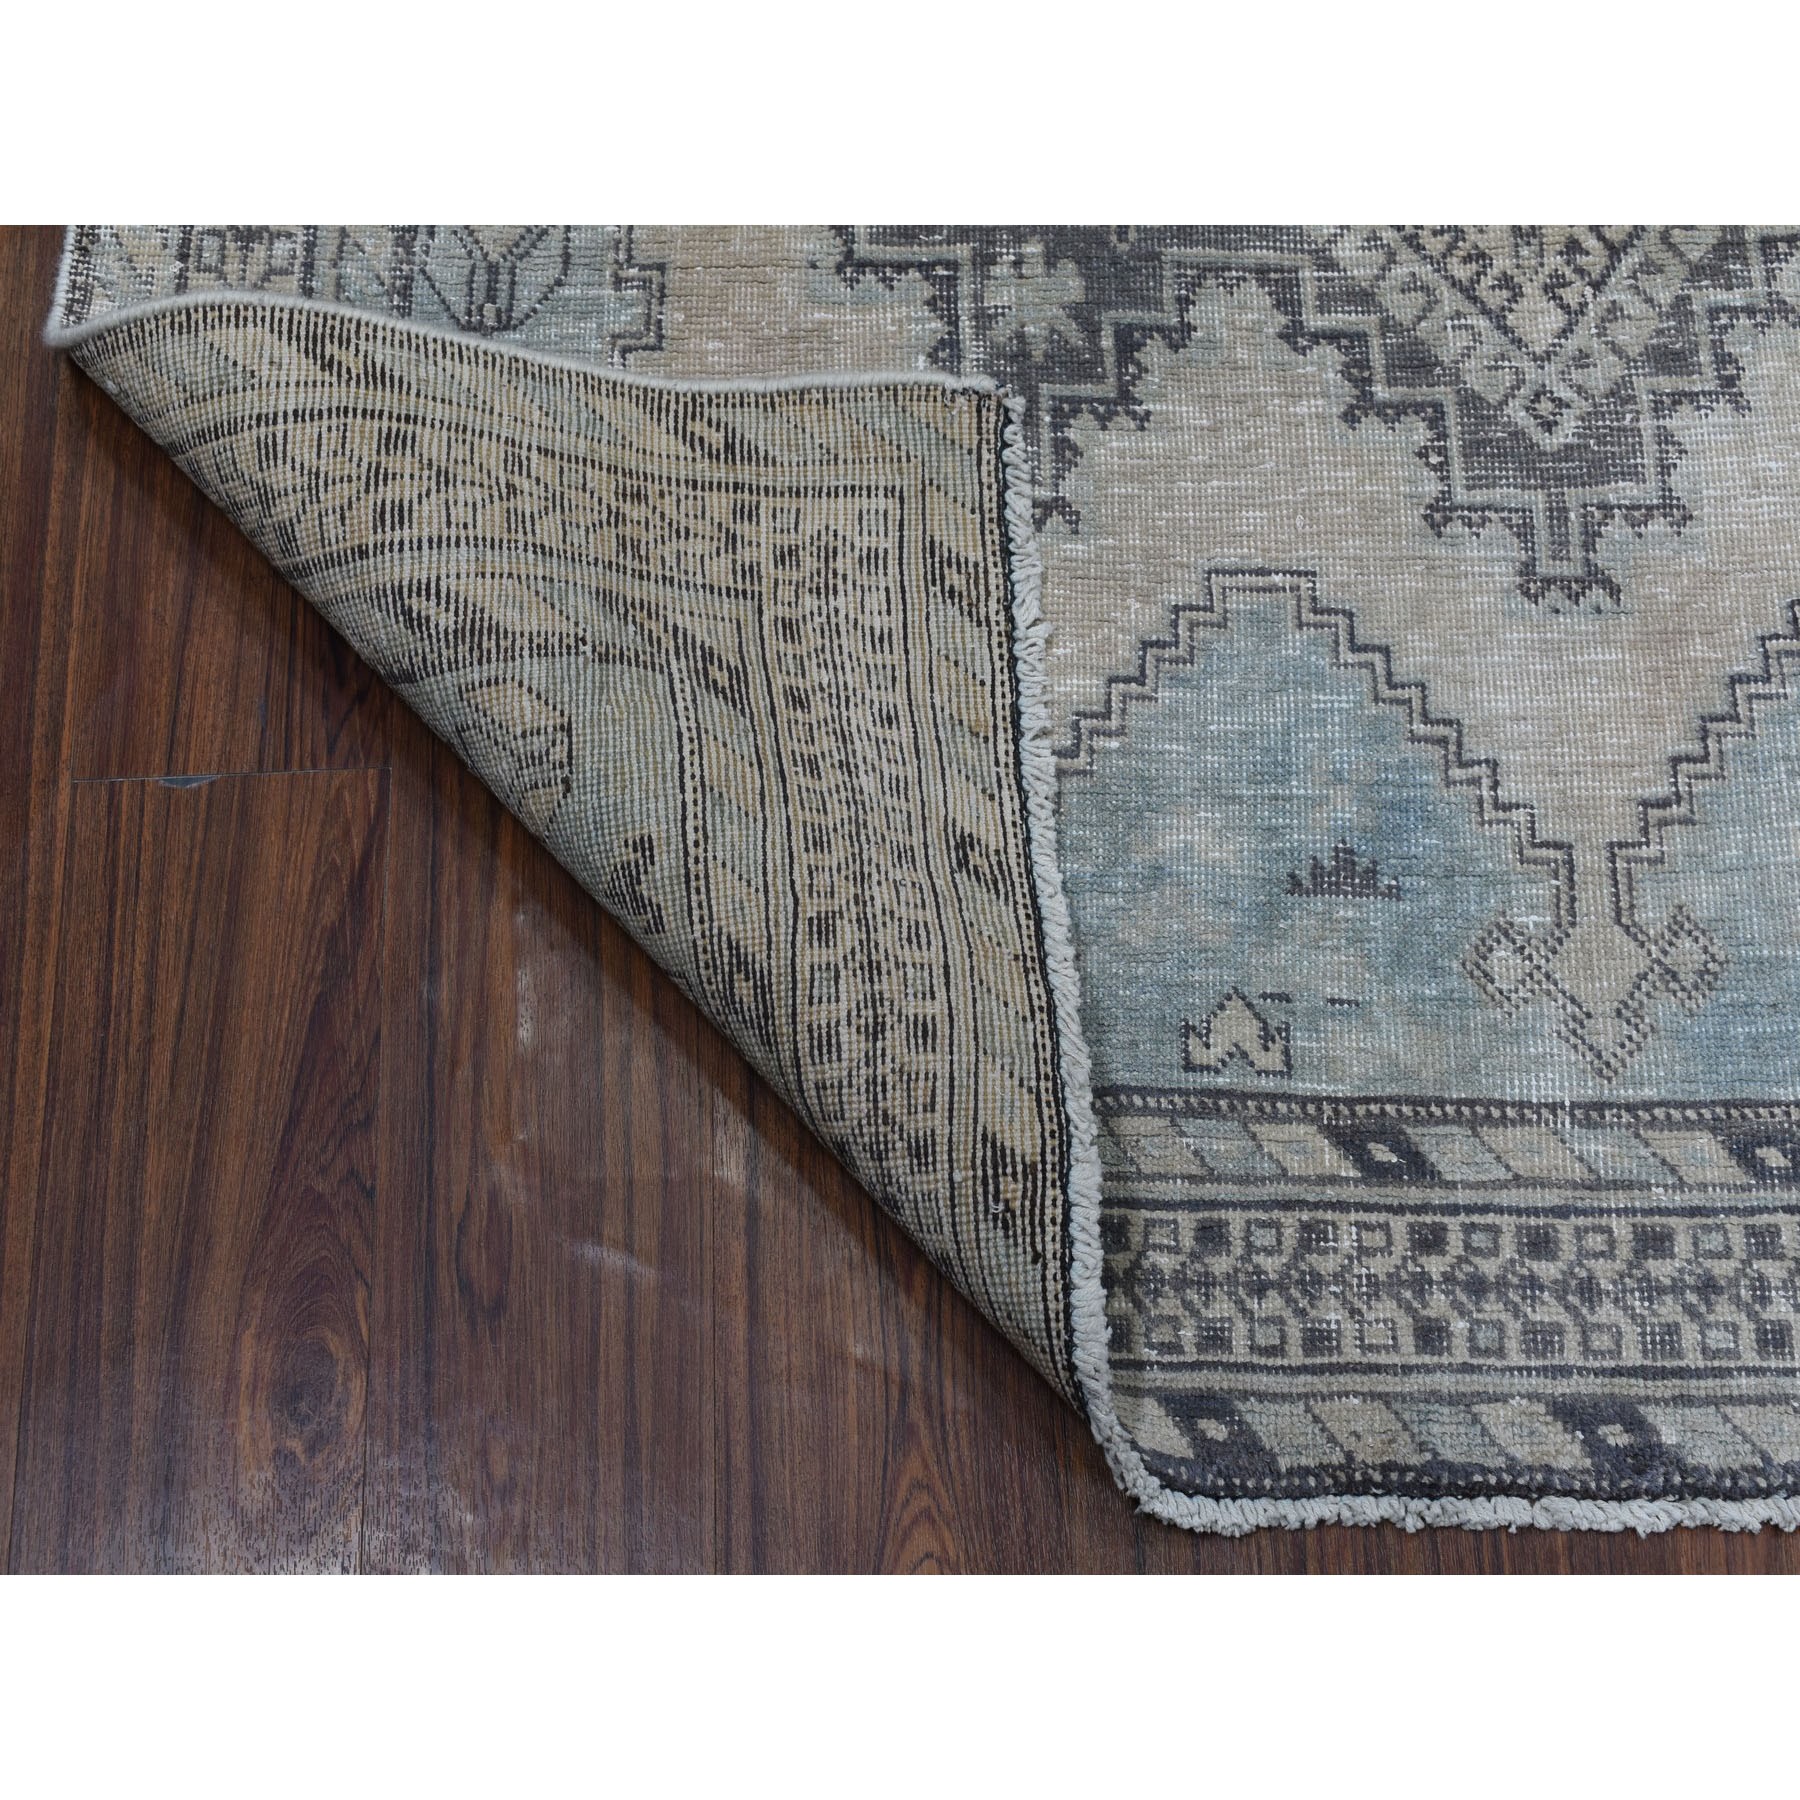 5-x6-8  Vintage And Worn Down Distressed Colors Persian Qashqai Hand Knotted Bohemian Rug 